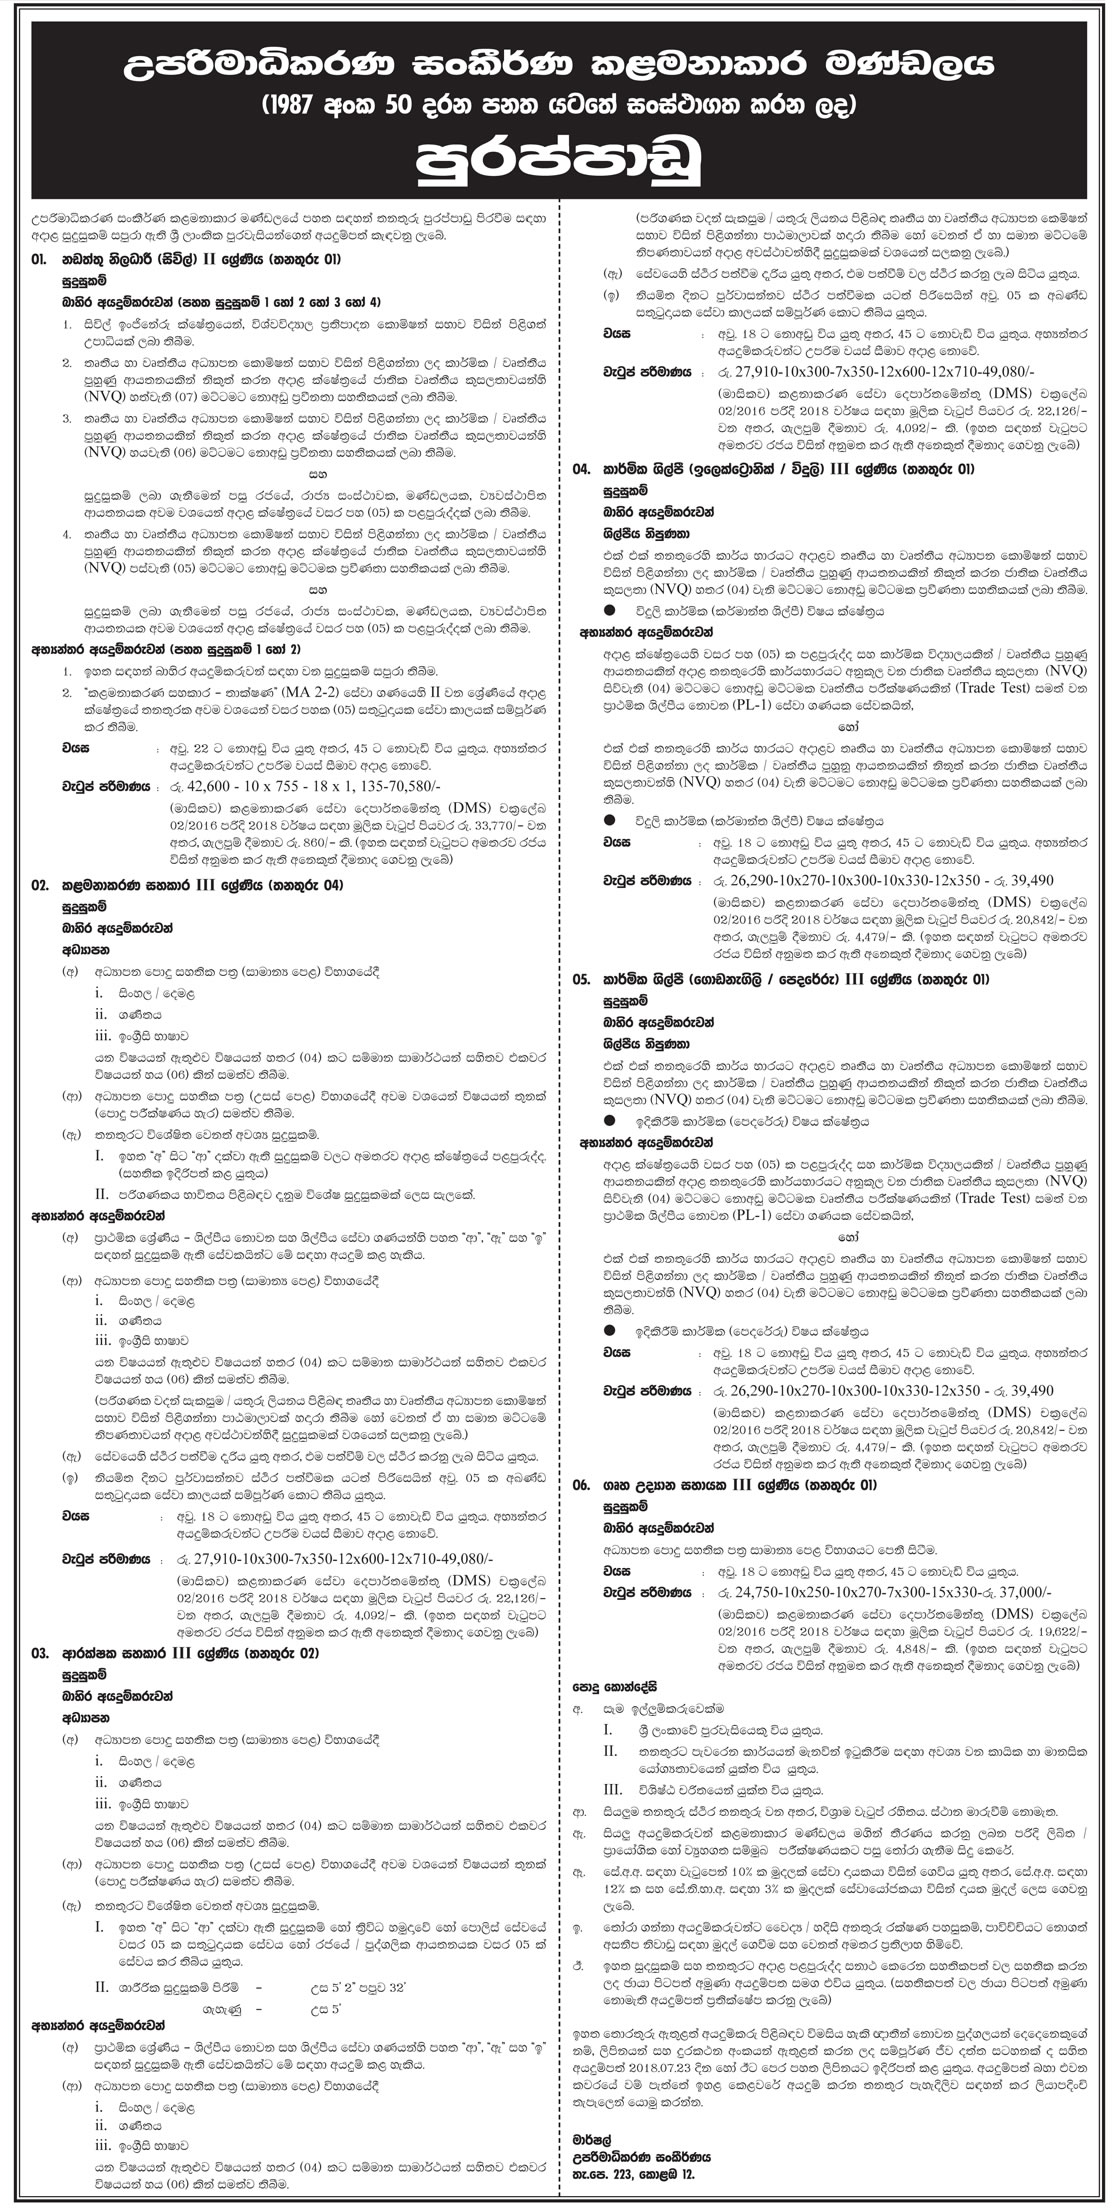 Management Assistant / Maintenance Officer / Security Assistant / Technician - Superior Courts Complex Board of Management Jobs Vacancies Application Form